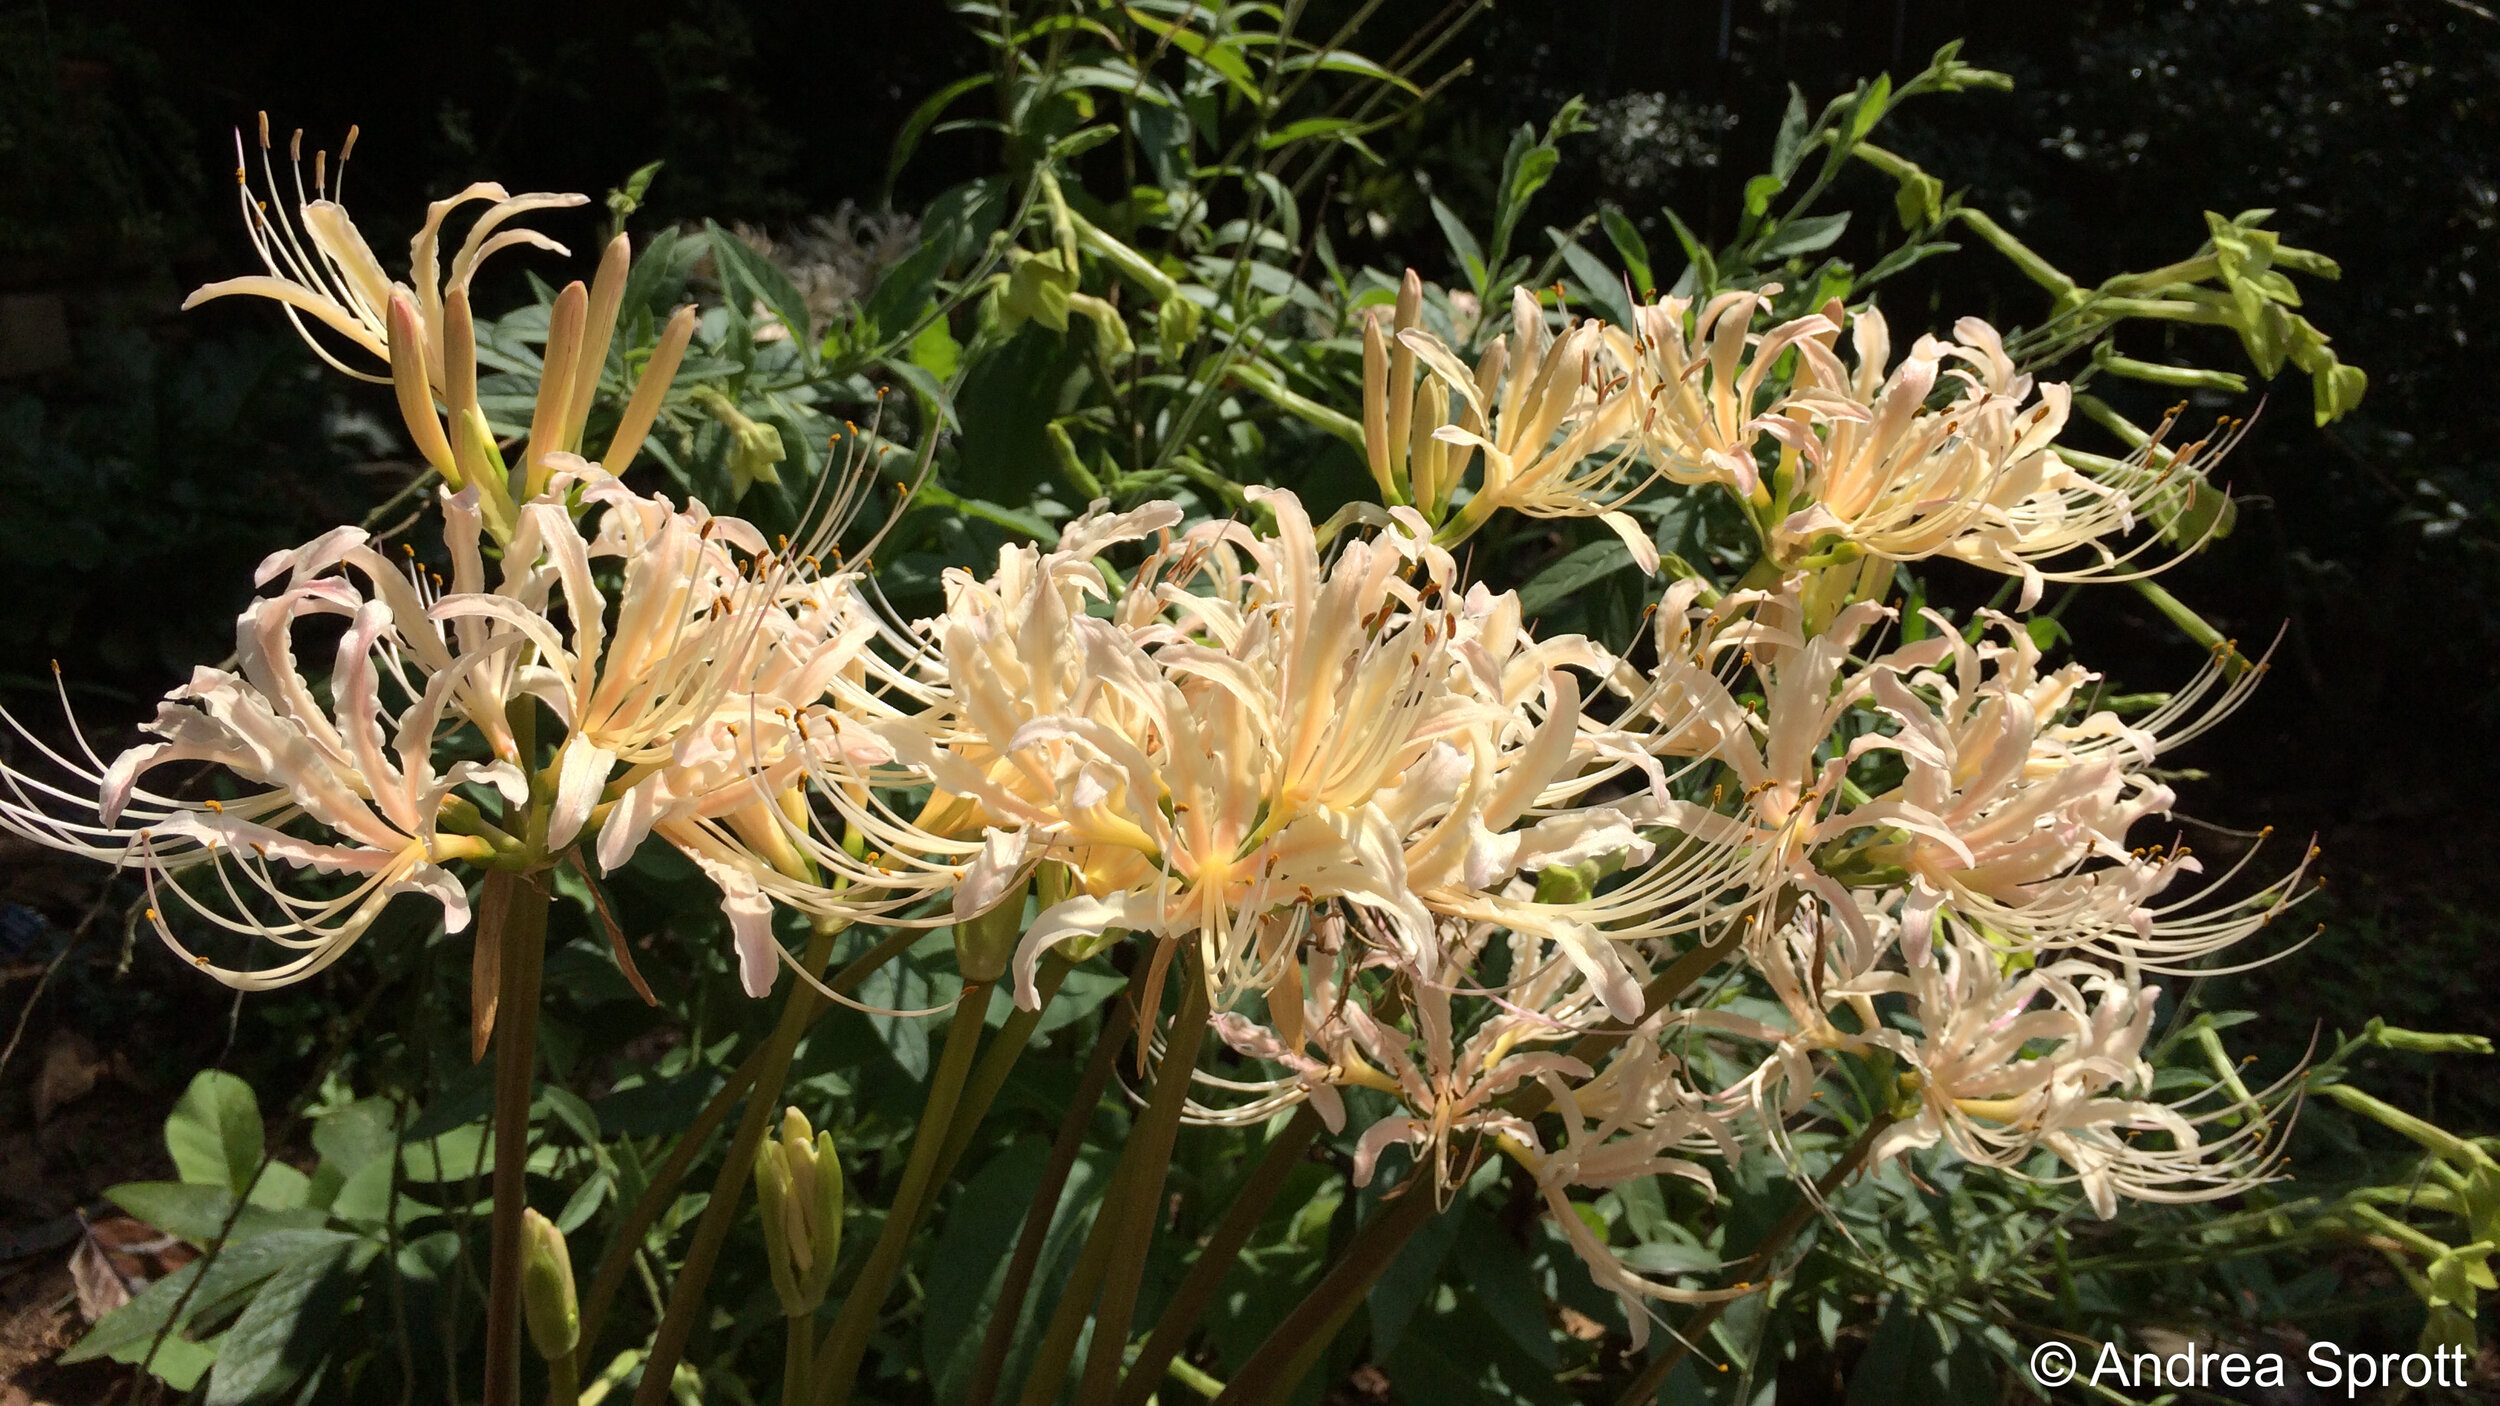  Part of the “disgusting display” of white surprise lilies in Elizabeth Lawrence’s garden 